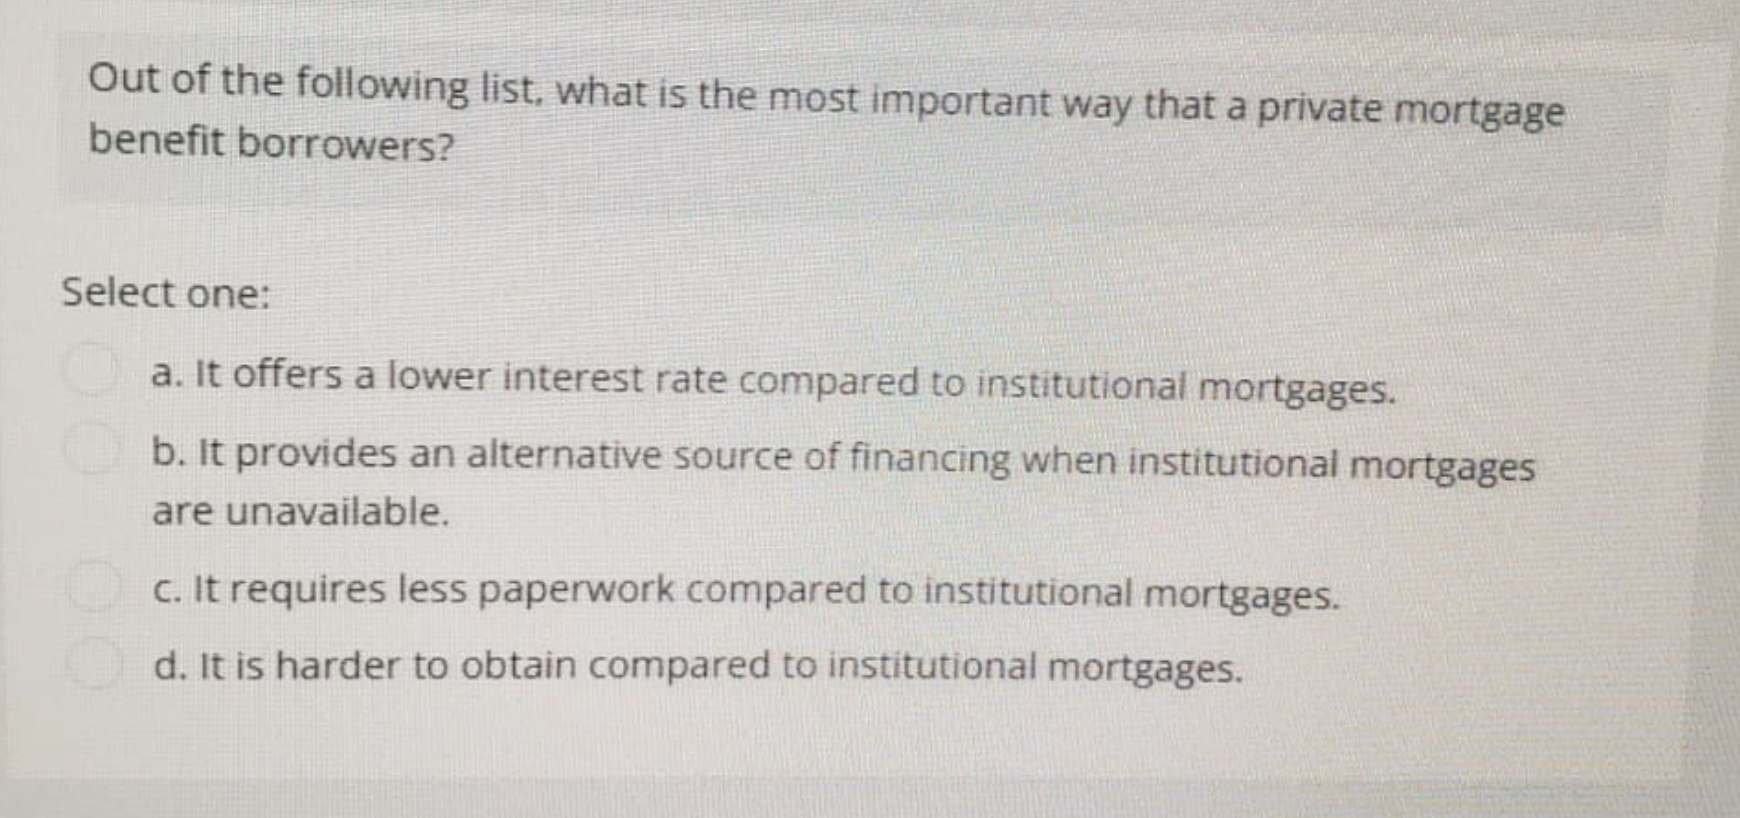 Out of the following list, what is the most important way that a private mortgage
benefit borrowers?
Select one:
a. It offers a lower interest rate compared to institutional mortgages.
b. It provides an alternative source of financing when institutional mortgages
are unavailable.
c. It requires less paperwork compared to institutional mortgages.
d. It is harder to obtain compared to institutional mortgages.